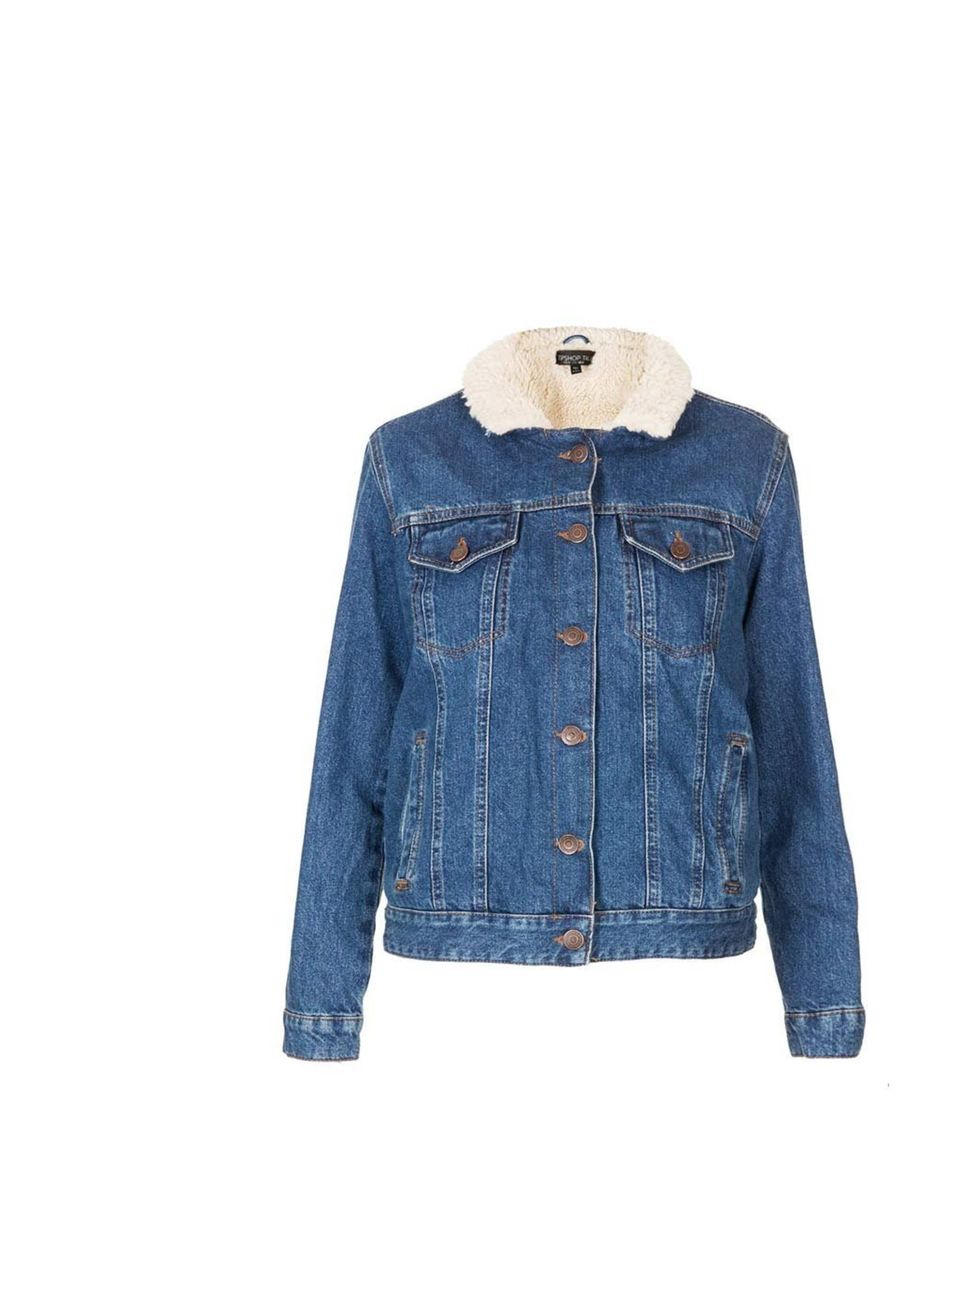 <p>Fleece lined for optimum snuggliness, this worn-in denim jacket will give your weekend wardrobe a lift. </p><p><a href="http://www.topshop.com/en/tsuk/product/new-in-this-week-2169932/new-in-this-week-493/tall-moto-vintage-borg-denim-jacket-2437623?bi=